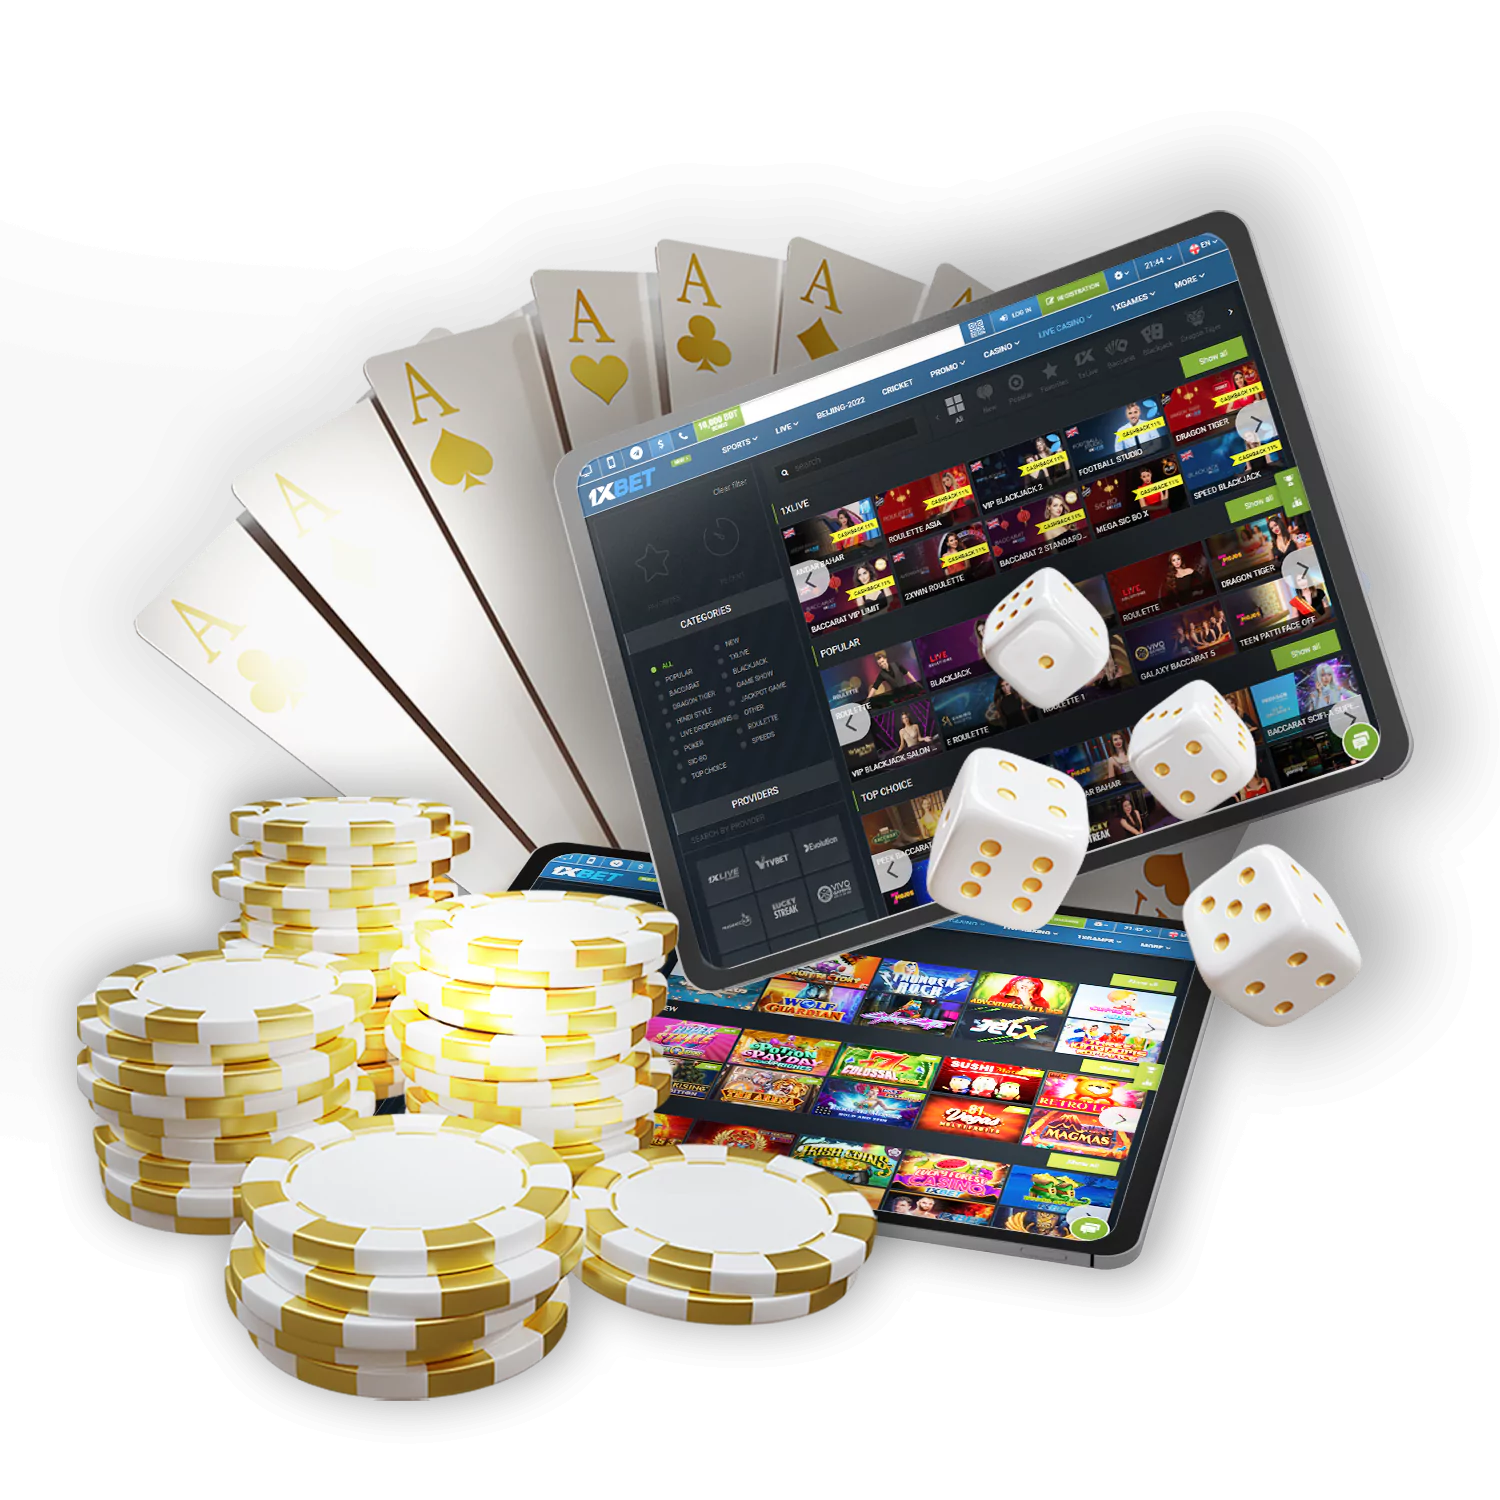 Take 10 Minutes to Get Started With online casino Cyprus